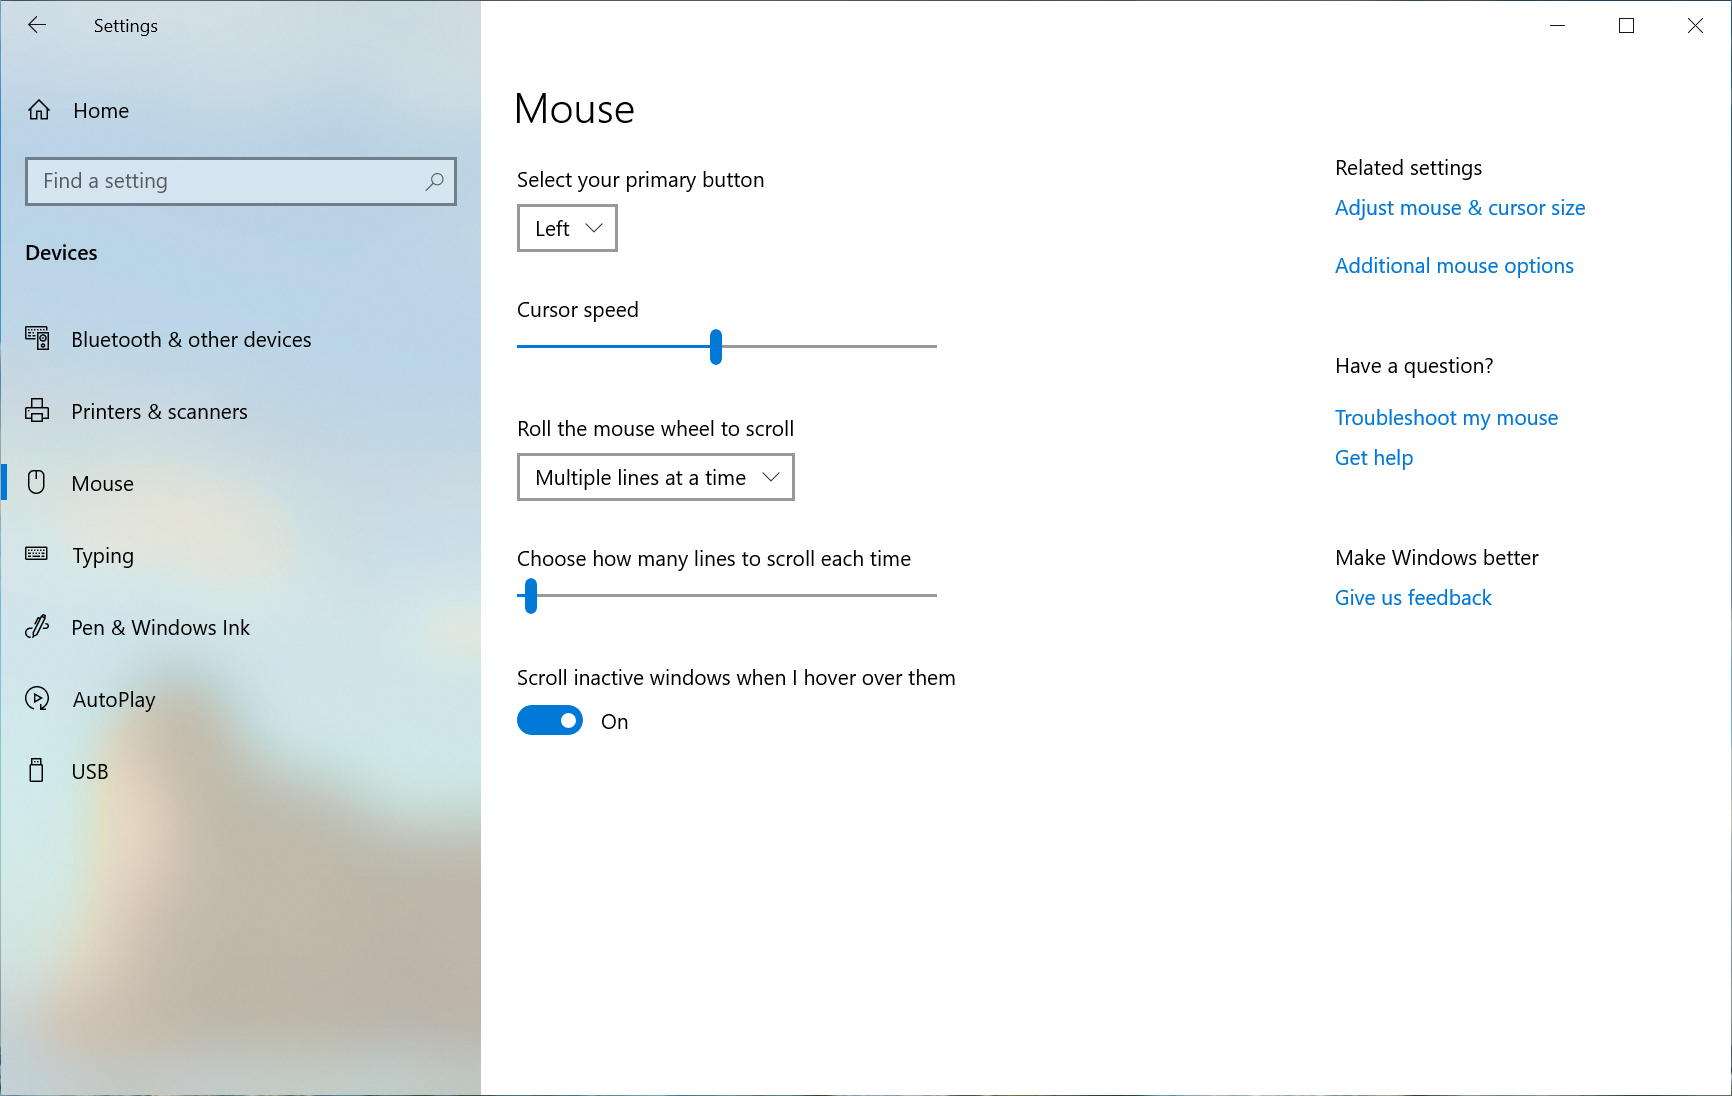 New Windows 10 Insider Preview Fast+Skip Build 18963 (20H1) - Aug. 16 263714f09c44708b5915a743c675b454.png